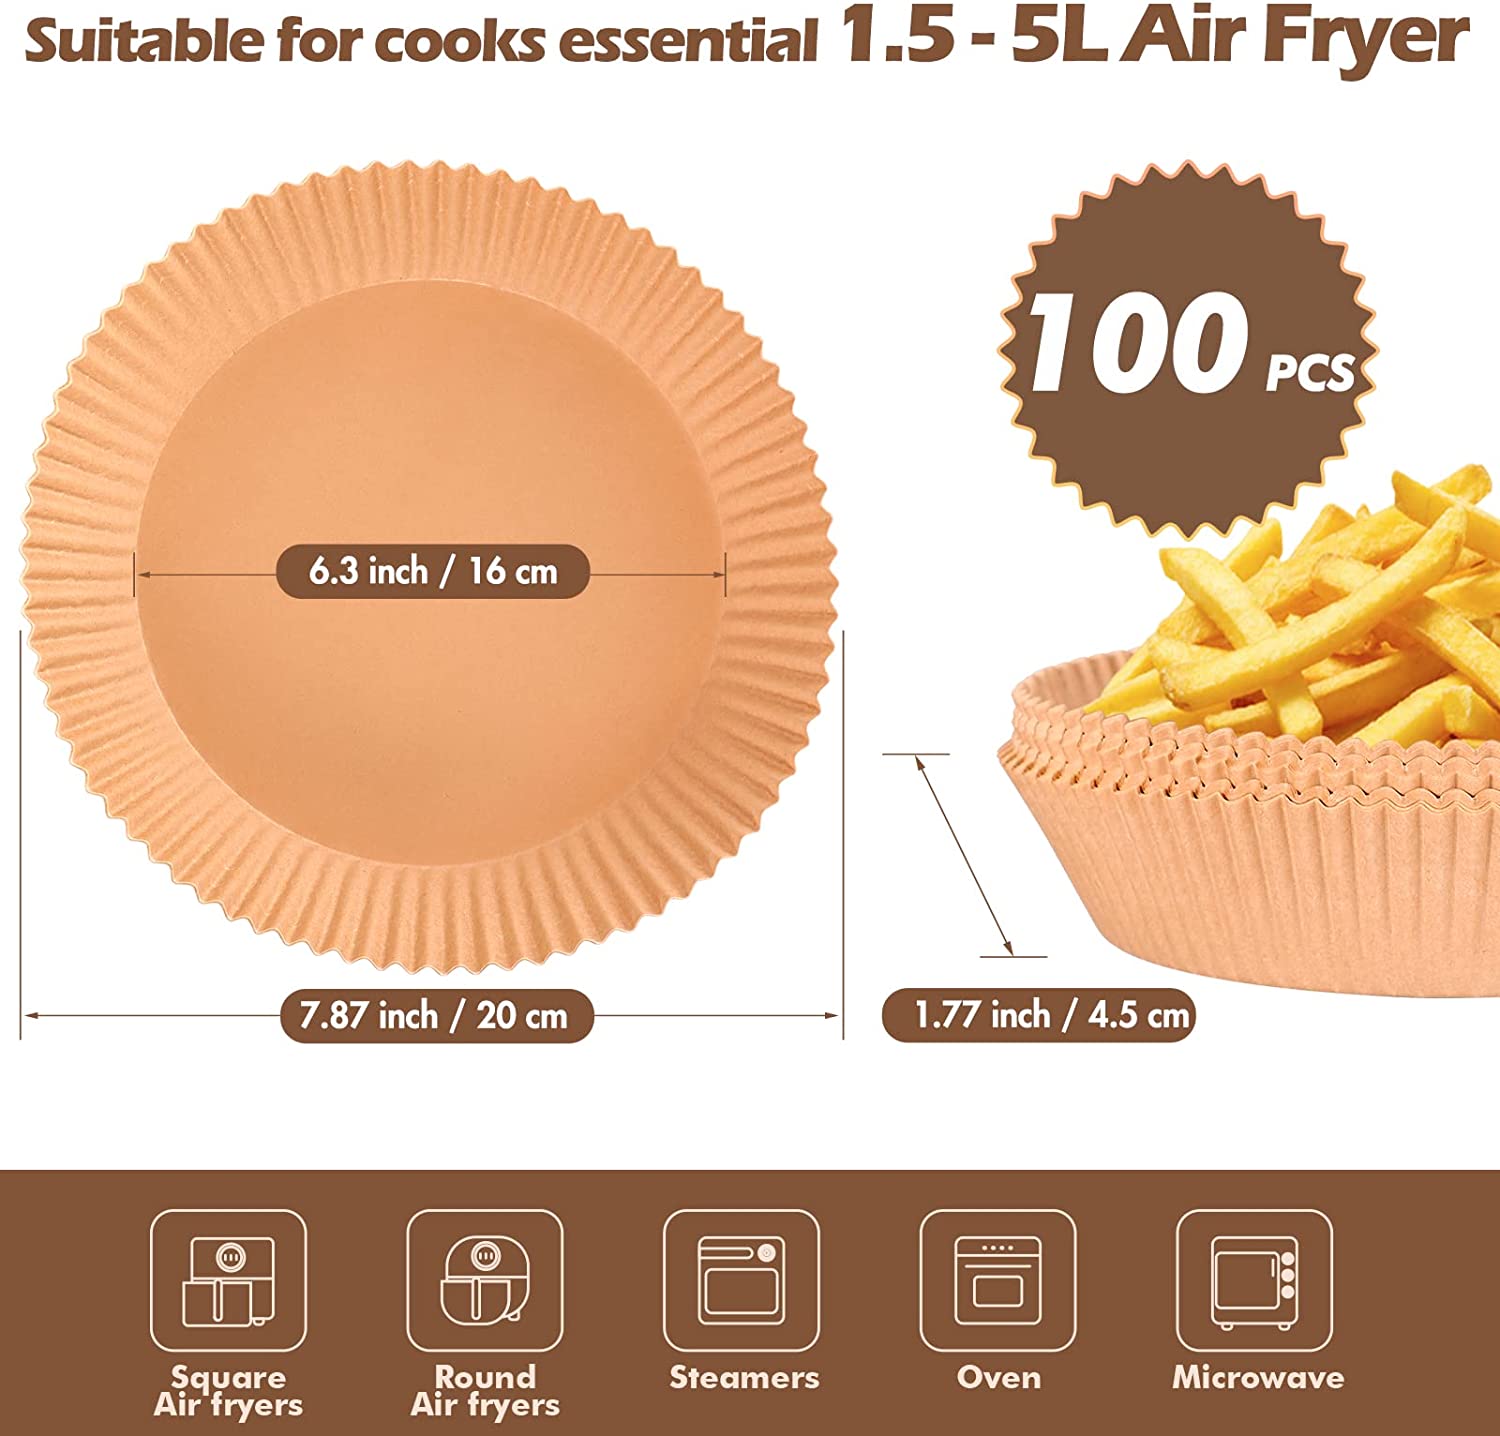 50pcs Air Fryer Disposable Paper Liners 8 Inches, Non-stick Air Fryer Paper  Liners, Oil-proof Baking Paper For Air Fryer, Paper For Oven Air Fryer  Baking Baking Microwave Fryer Mat